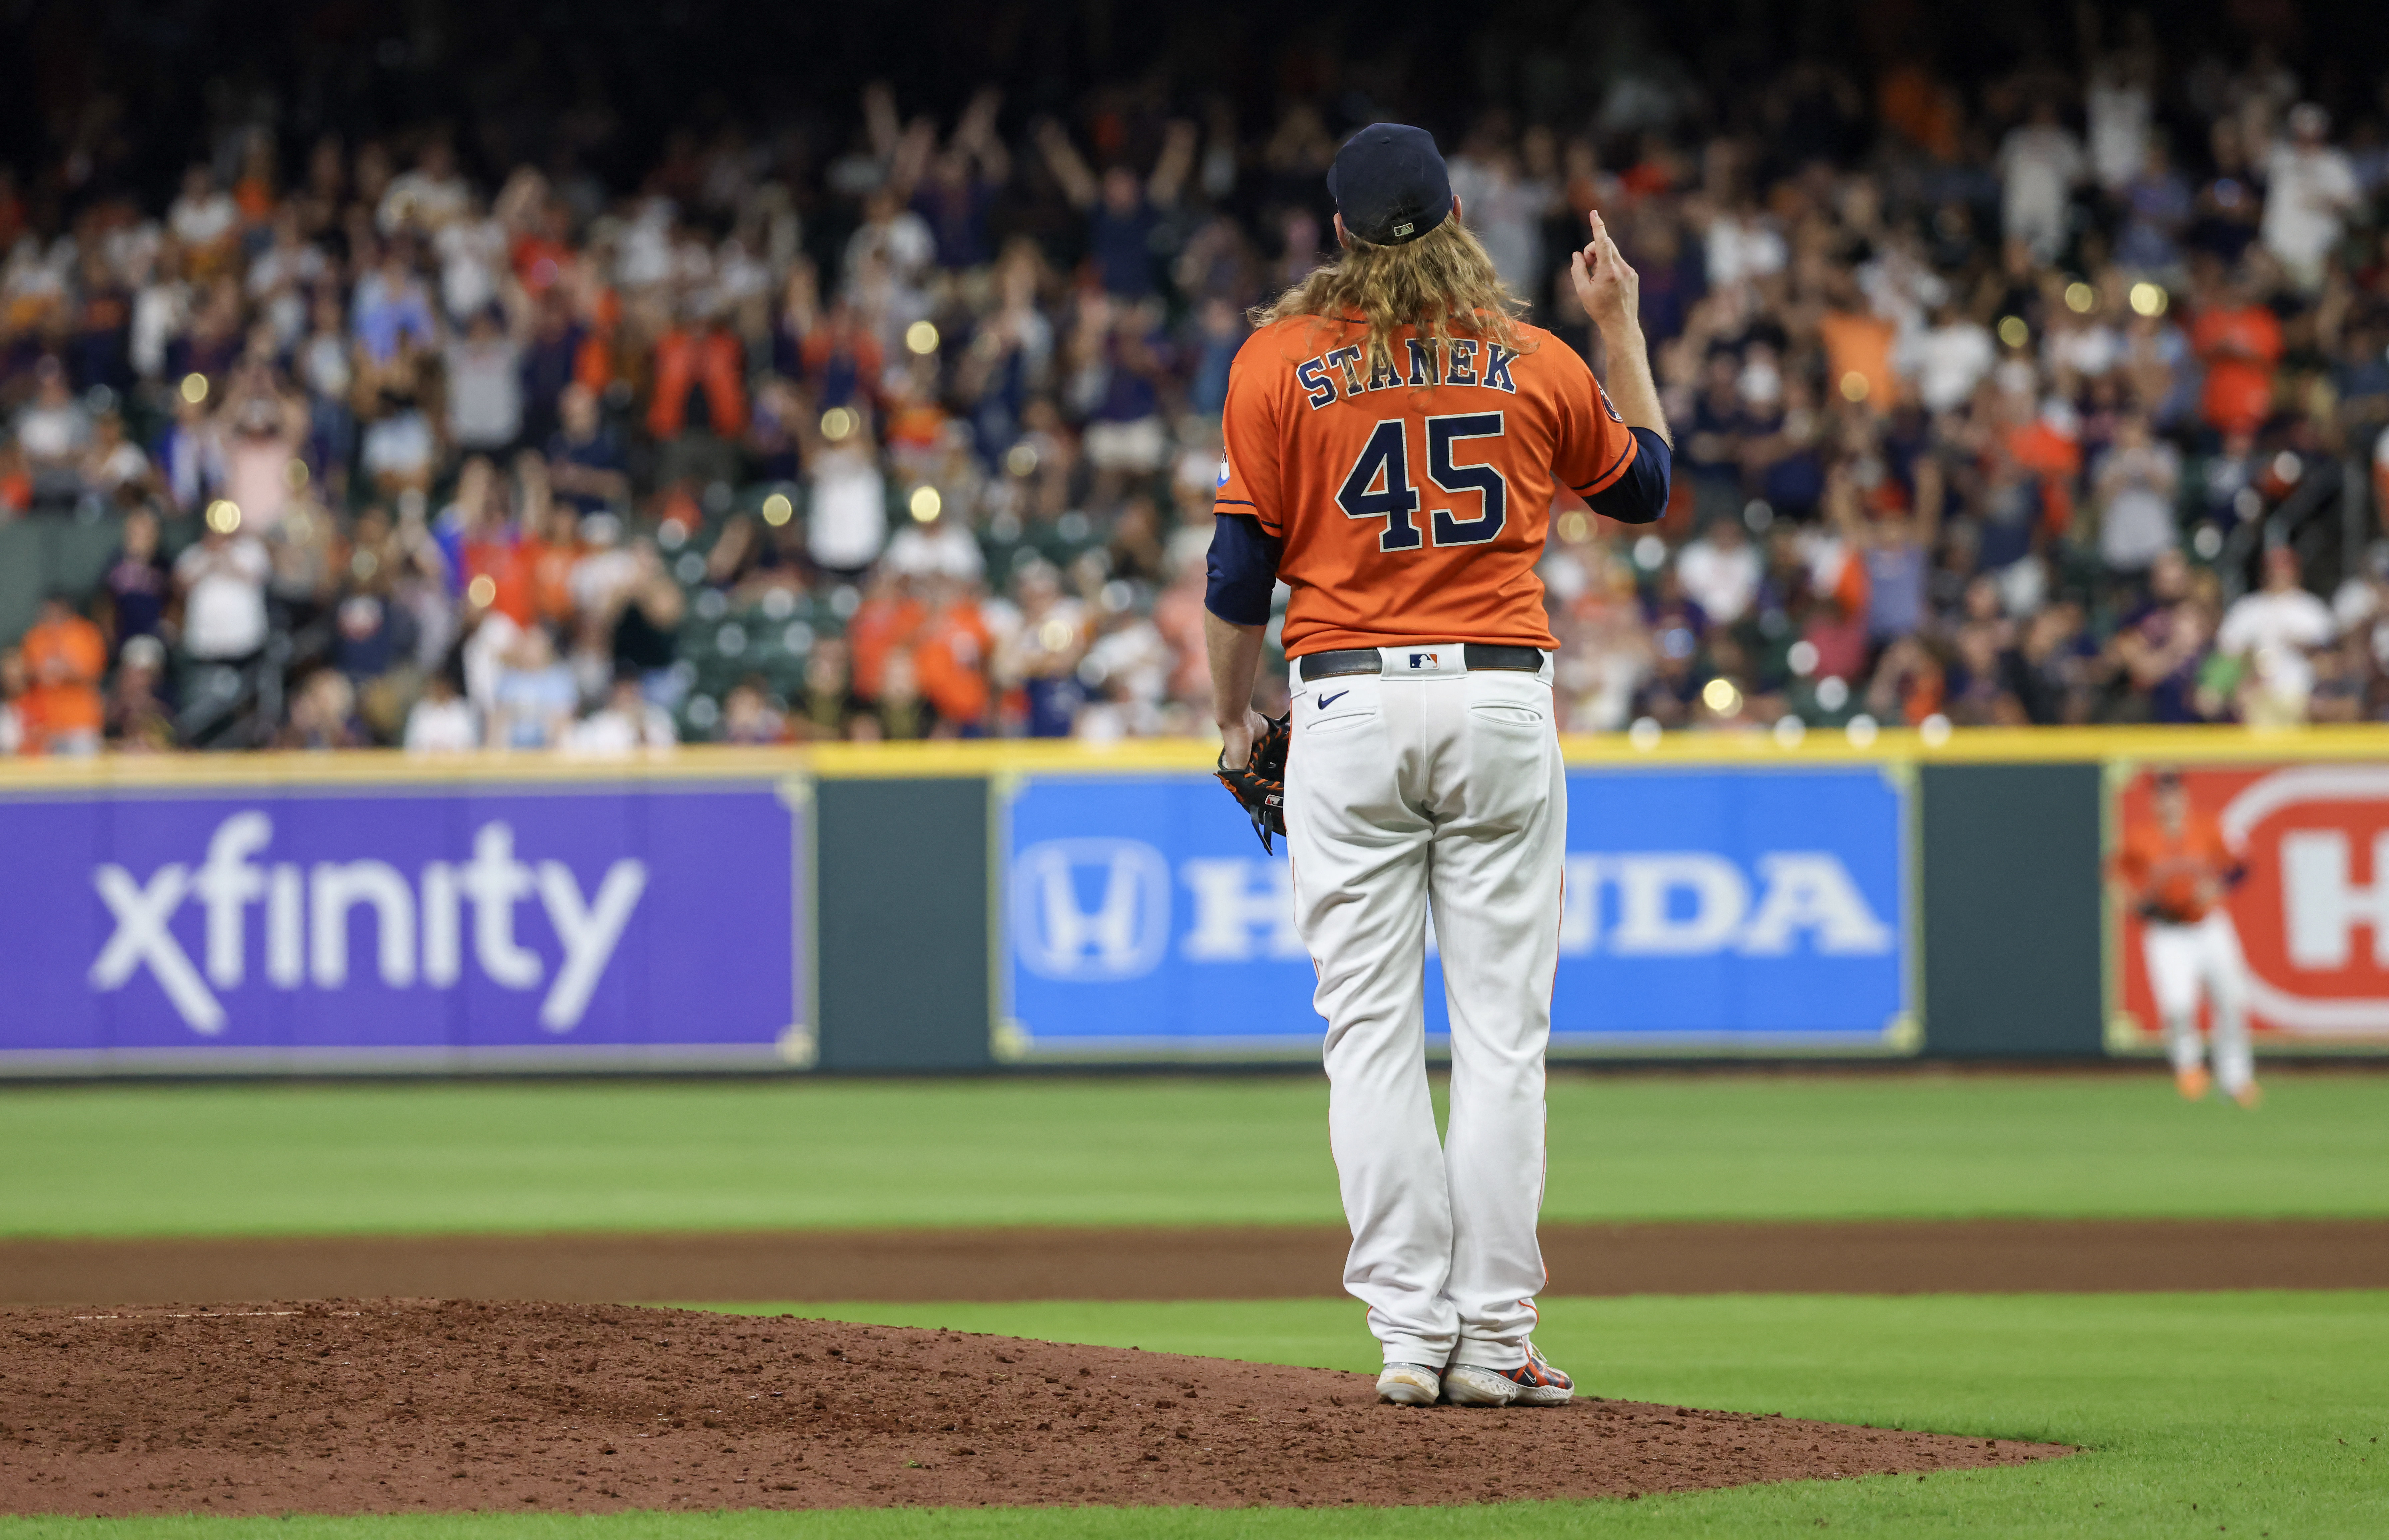 Stanek Advances to World Series with Astros